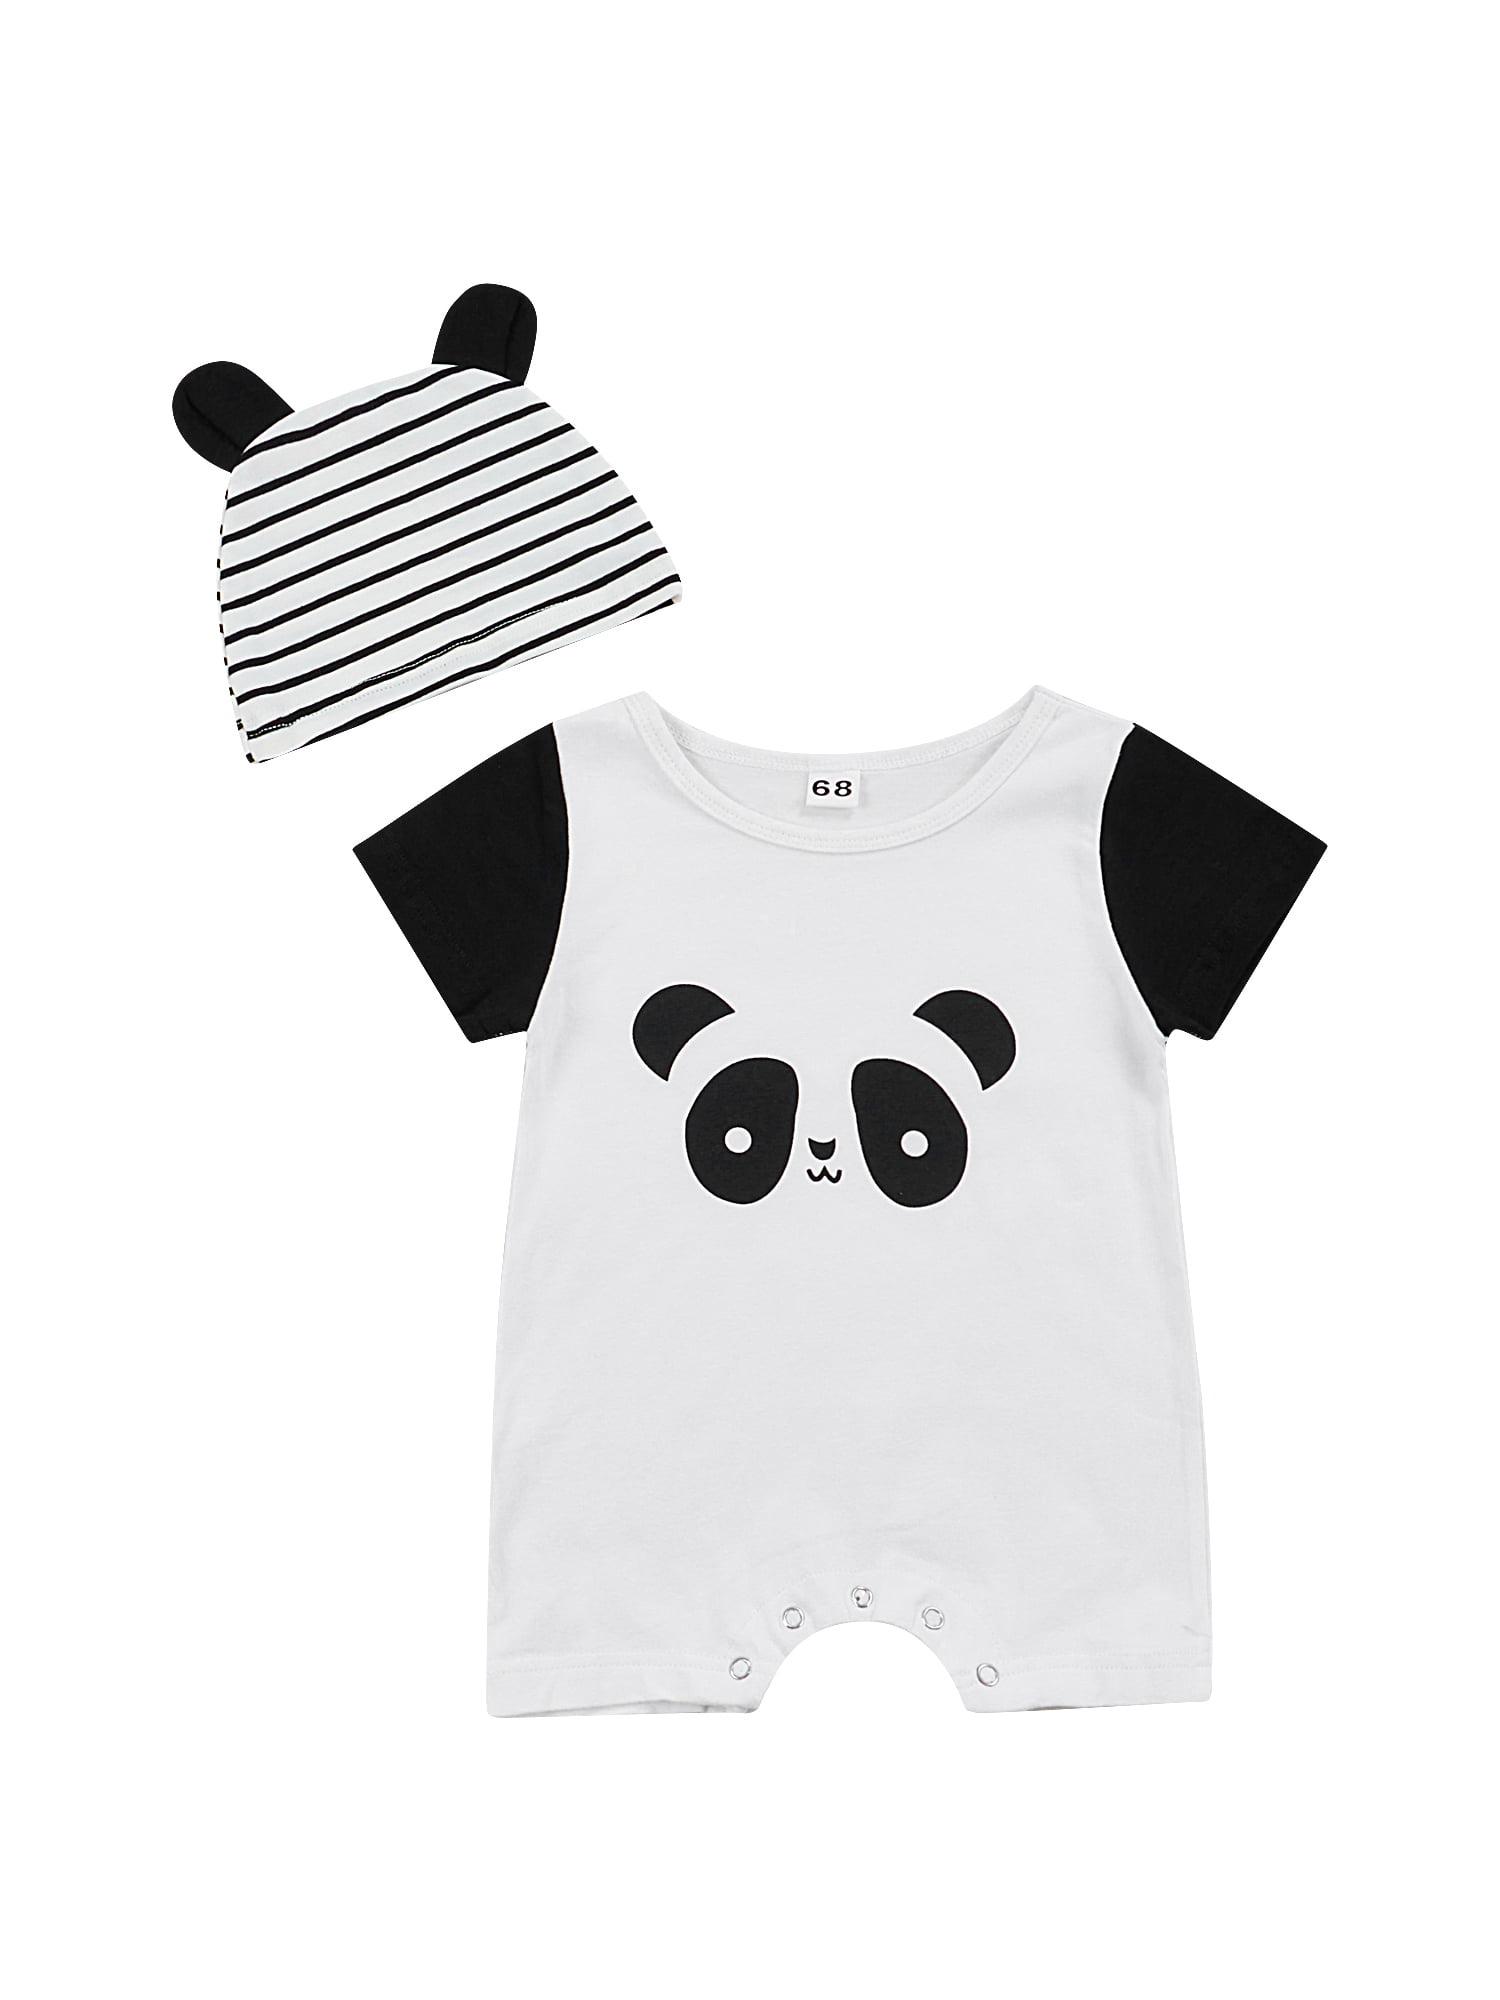 LzVong My Patronus is A Panda Cotton Baby Short Sleeve Bodysuits Jersey Rompers